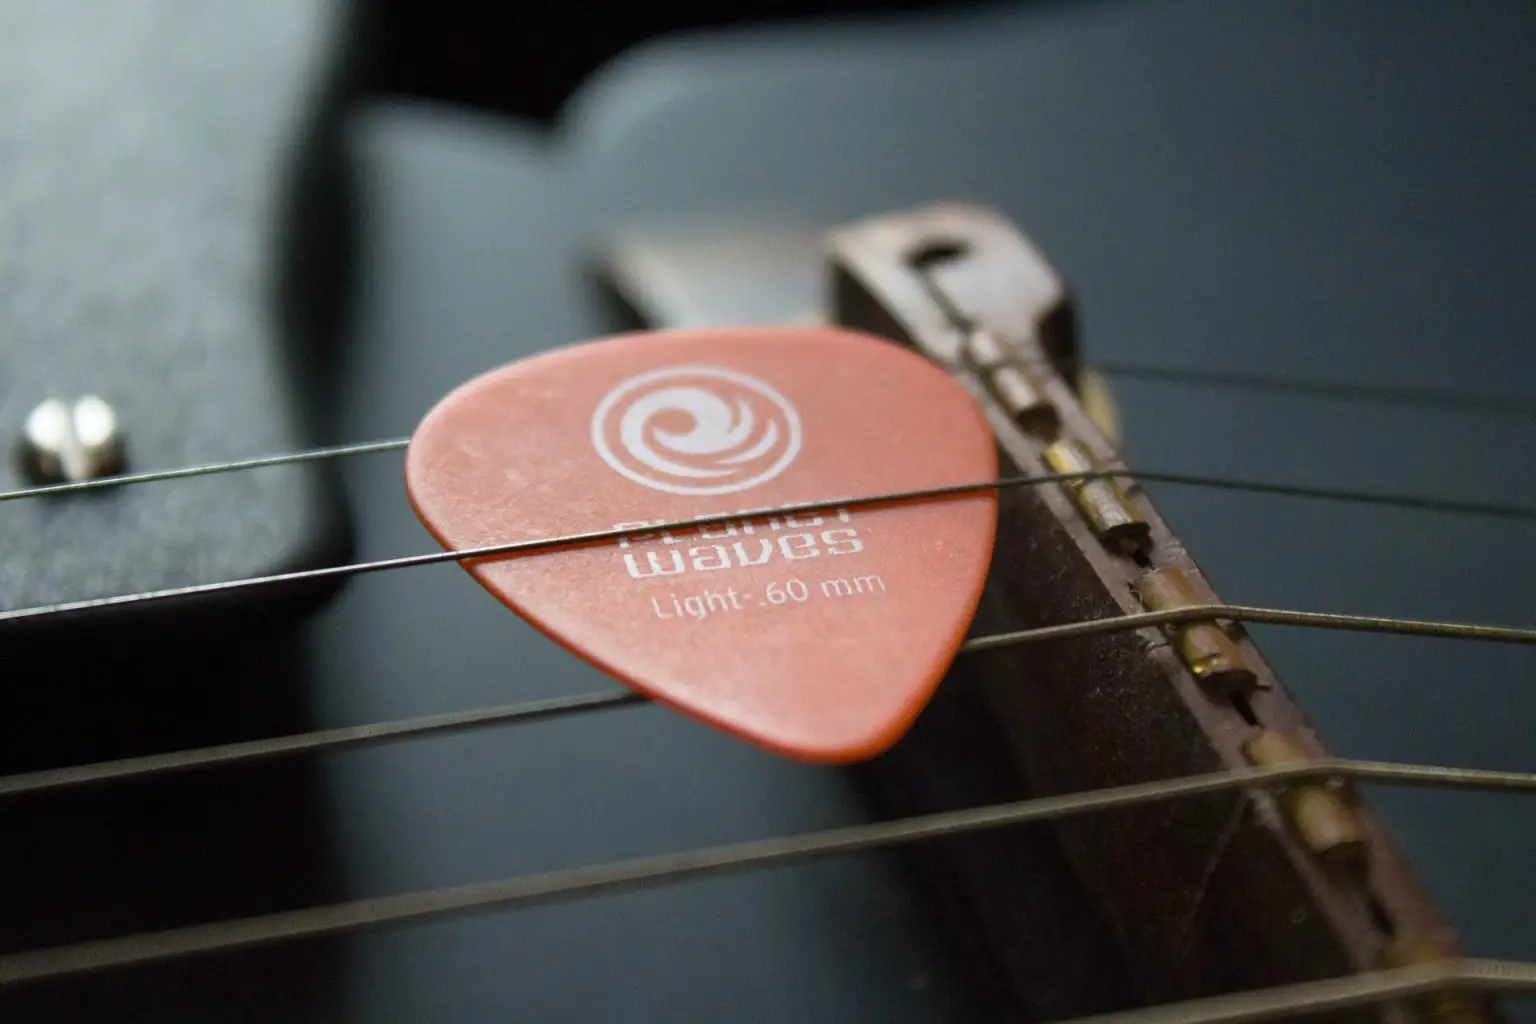 Hard Vs Soft Guitar Picks What's Better For Different Usages